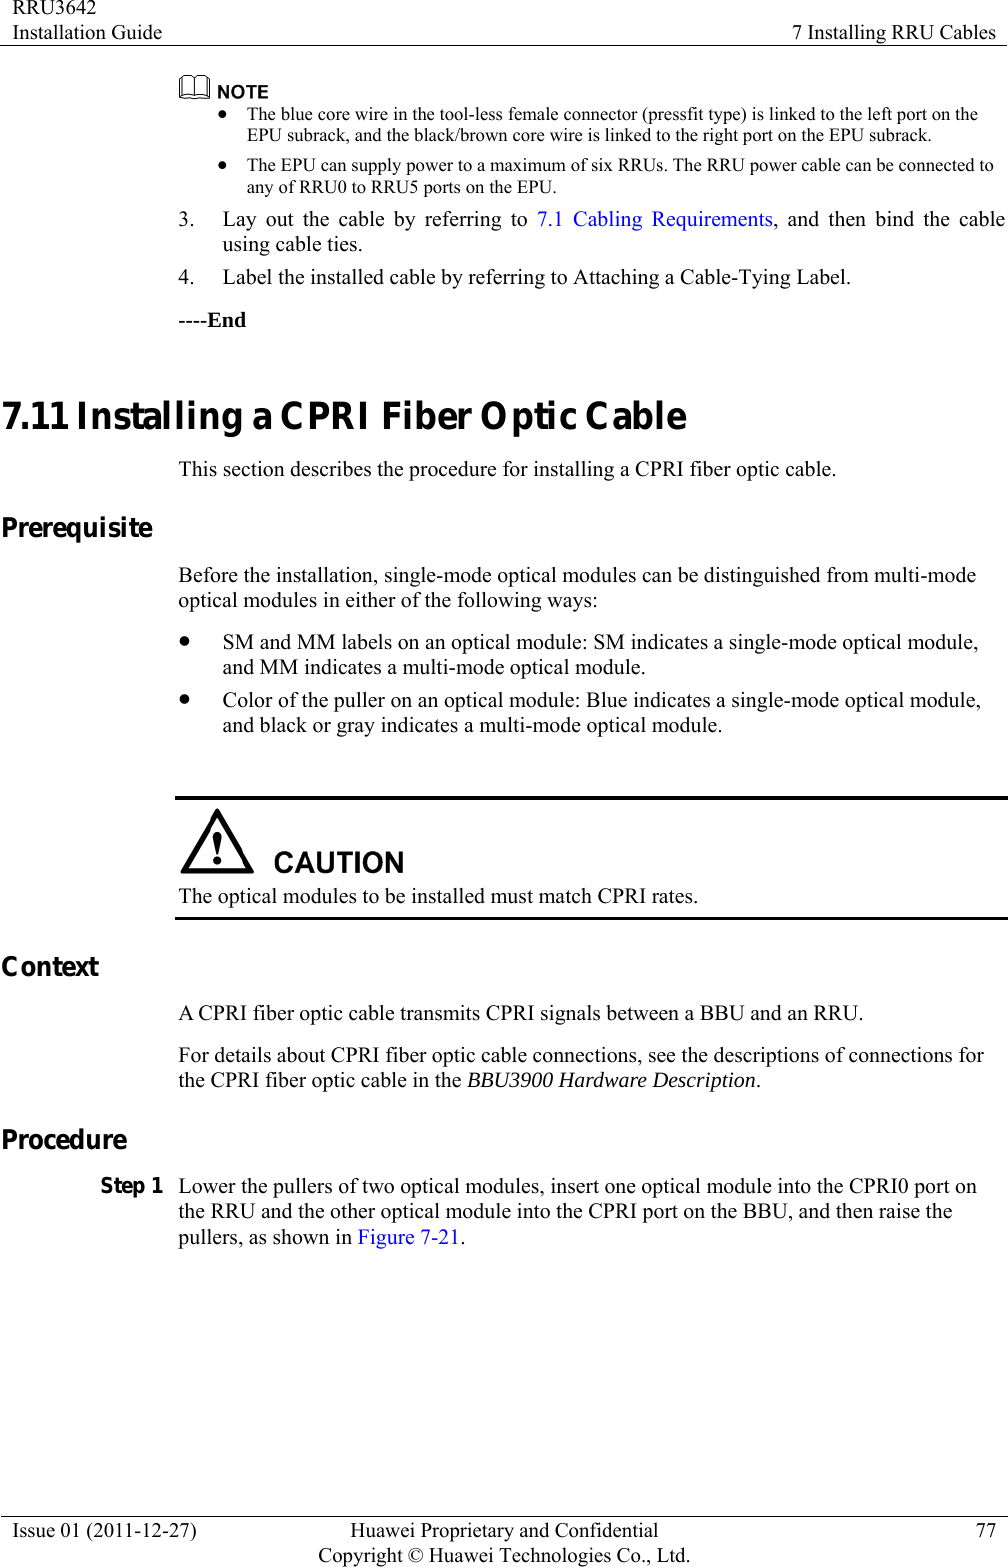 RRU3642 Installation Guide  7 Installing RRU Cables Issue 01 (2011-12-27)  Huawei Proprietary and Confidential         Copyright © Huawei Technologies Co., Ltd.77  z The blue core wire in the tool-less female connector (pressfit type) is linked to the left port on the EPU subrack, and the black/brown core wire is linked to the right port on the EPU subrack. z The EPU can supply power to a maximum of six RRUs. The RRU power cable can be connected to any of RRU0 to RRU5 ports on the EPU. 3. Lay out the cable by referring to 7.1 Cabling Requirements, and then bind the cable using cable ties. 4. Label the installed cable by referring to Attaching a Cable-Tying Label. ----End 7.11 Installing a CPRI Fiber Optic Cable This section describes the procedure for installing a CPRI fiber optic cable. Prerequisite Before the installation, single-mode optical modules can be distinguished from multi-mode optical modules in either of the following ways: z SM and MM labels on an optical module: SM indicates a single-mode optical module, and MM indicates a multi-mode optical module. z Color of the puller on an optical module: Blue indicates a single-mode optical module, and black or gray indicates a multi-mode optical module.   The optical modules to be installed must match CPRI rates. Context A CPRI fiber optic cable transmits CPRI signals between a BBU and an RRU. For details about CPRI fiber optic cable connections, see the descriptions of connections for the CPRI fiber optic cable in the BBU3900 Hardware Description. Procedure Step 1 Lower the pullers of two optical modules, insert one optical module into the CPRI0 port on the RRU and the other optical module into the CPRI port on the BBU, and then raise the pullers, as shown in Figure 7-21. 